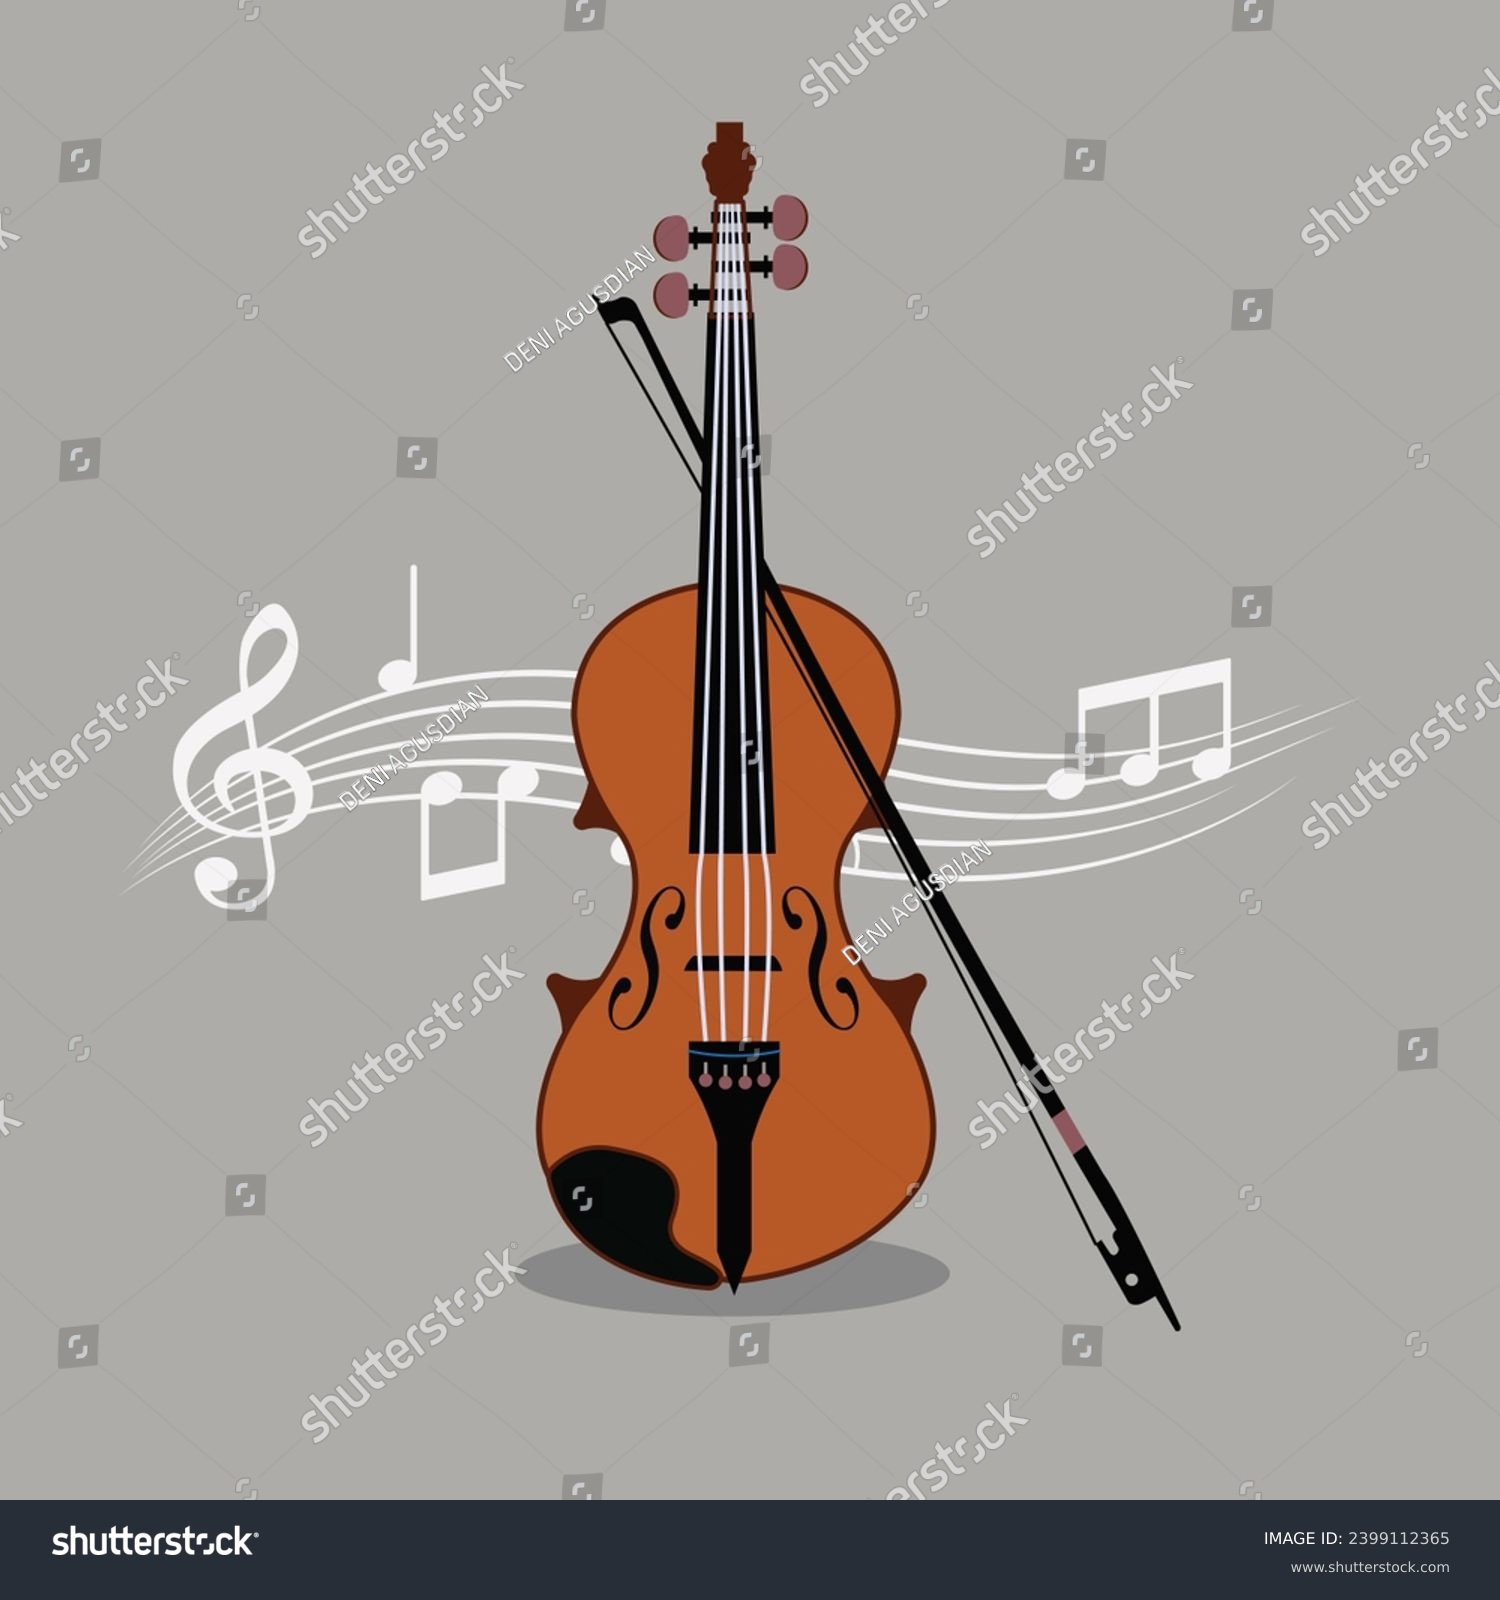 SVG of Violin, a harmonious instrument emitting beauty through plucked strings. Present in classical orchestras and diverse genres, it portrays the elegance and richness of music svg